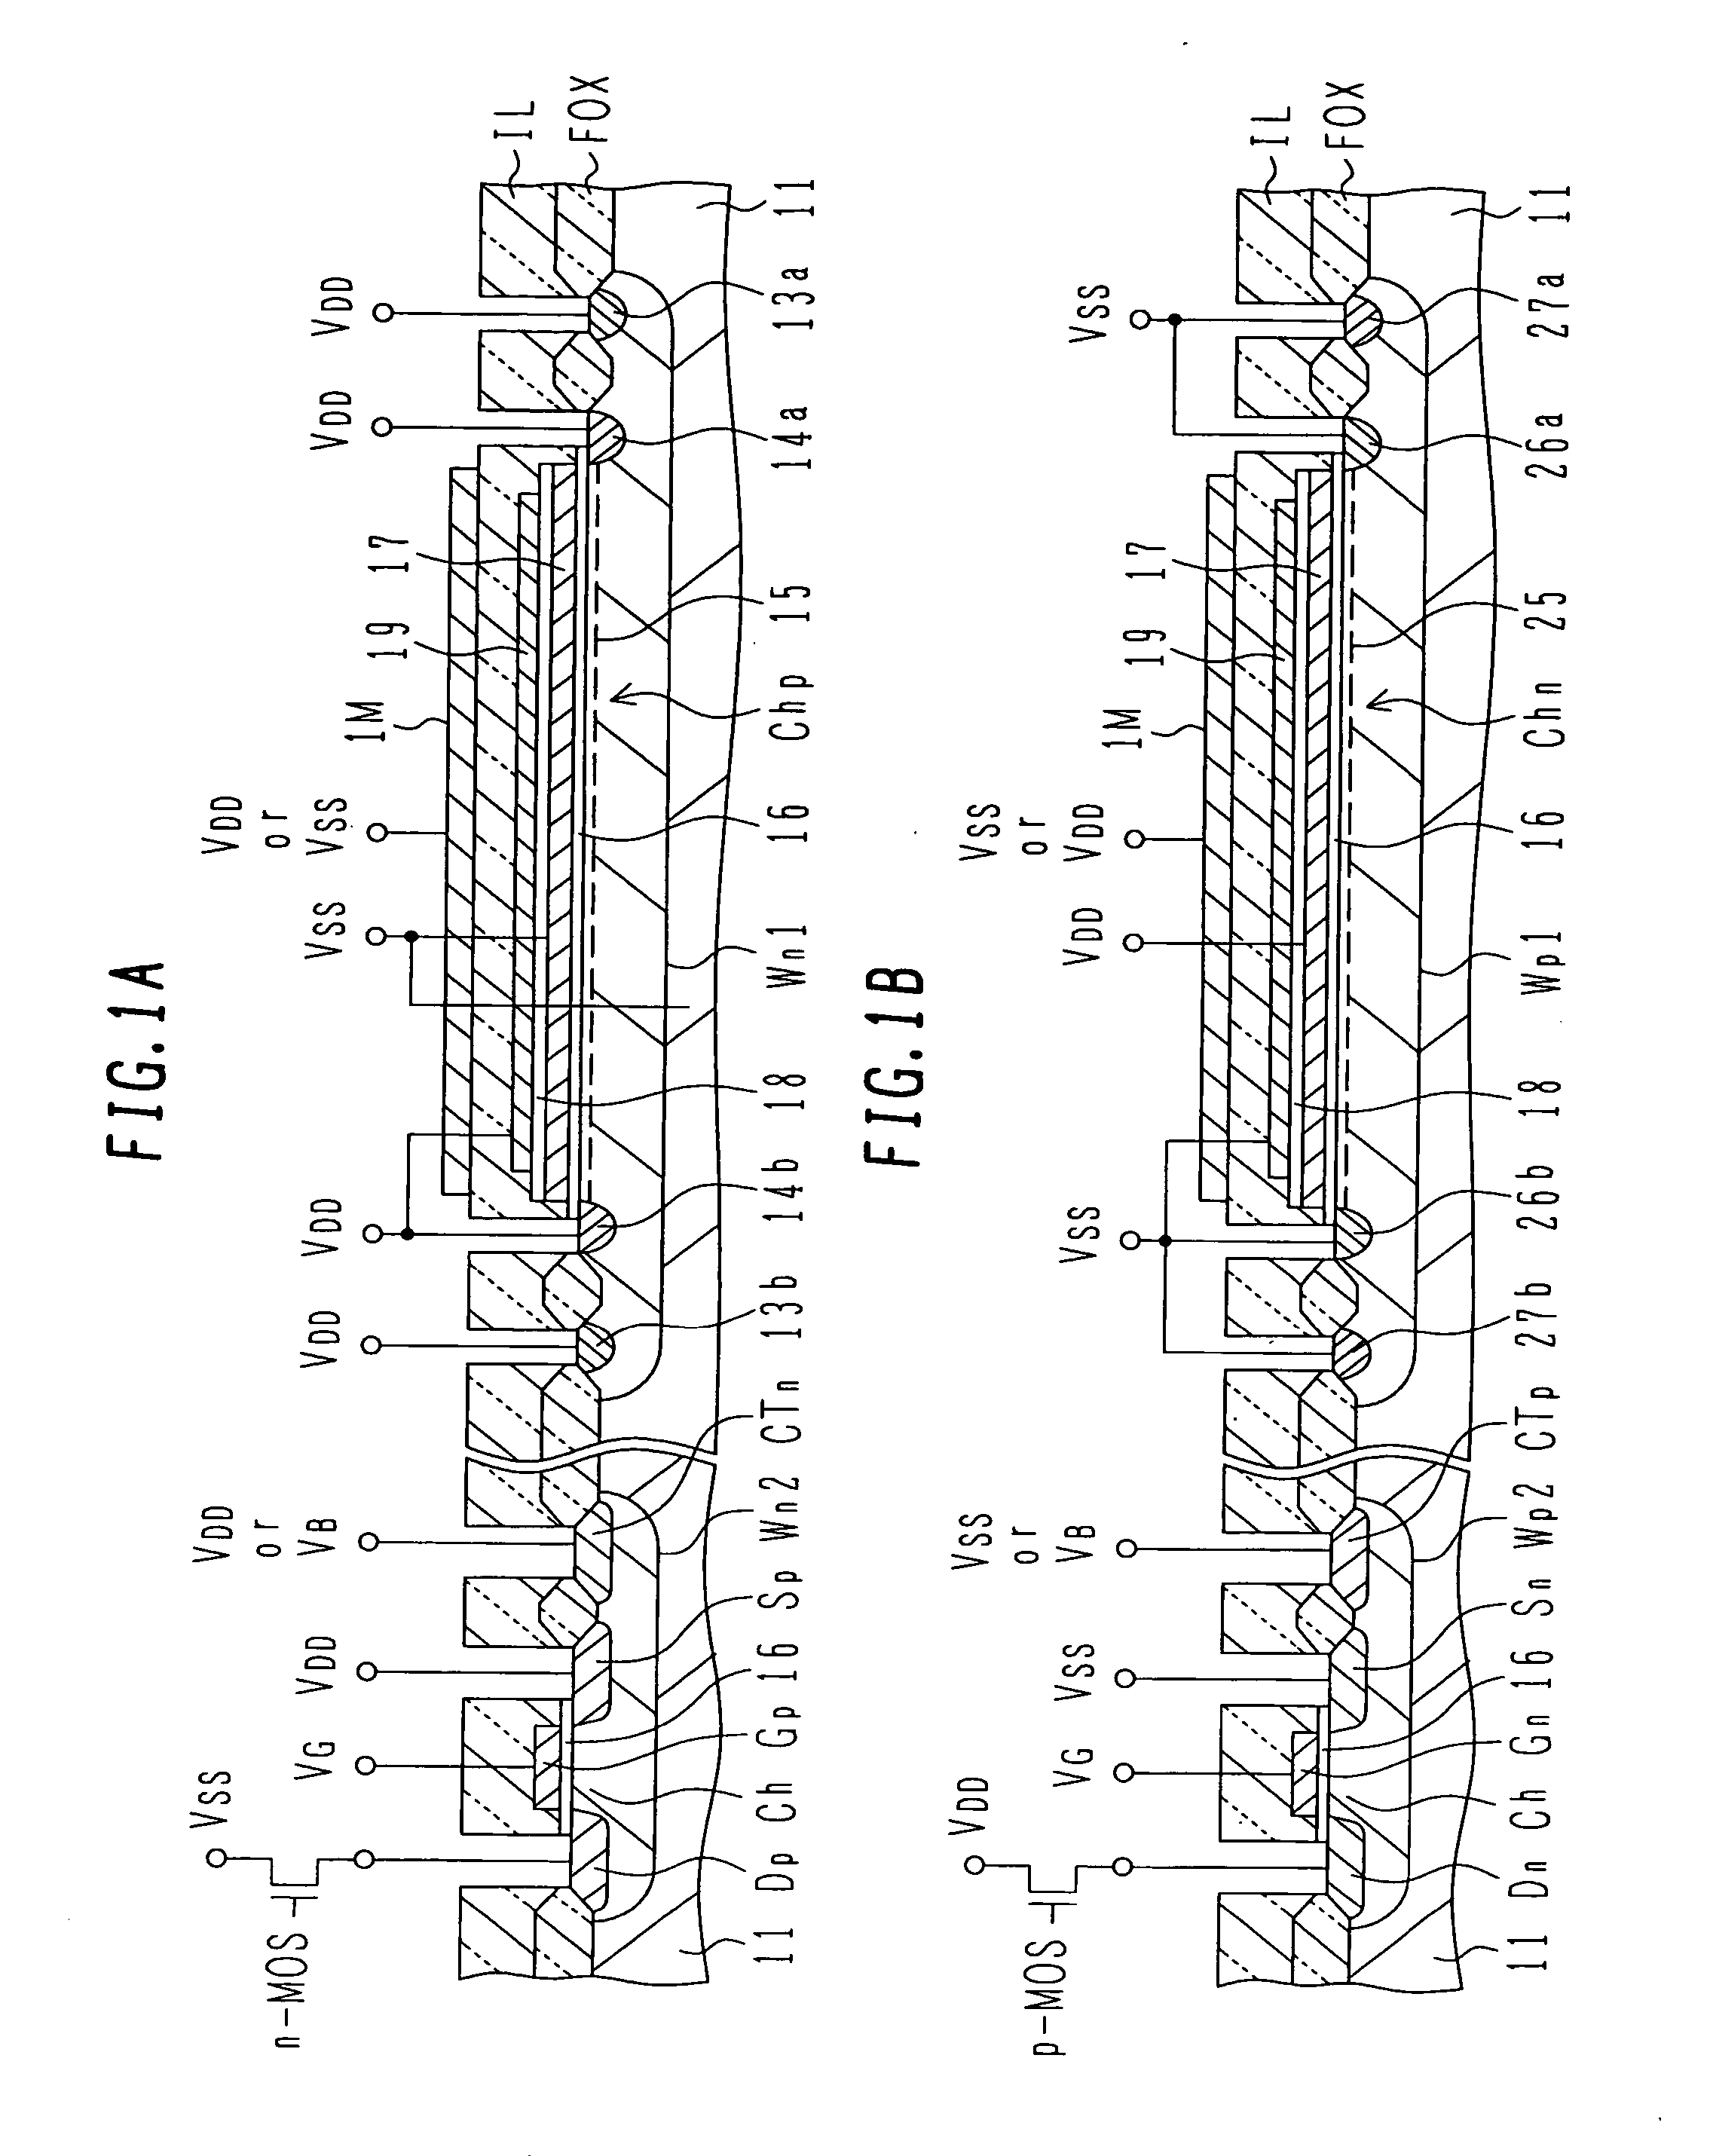 Semiconductor device with bypass capacitor